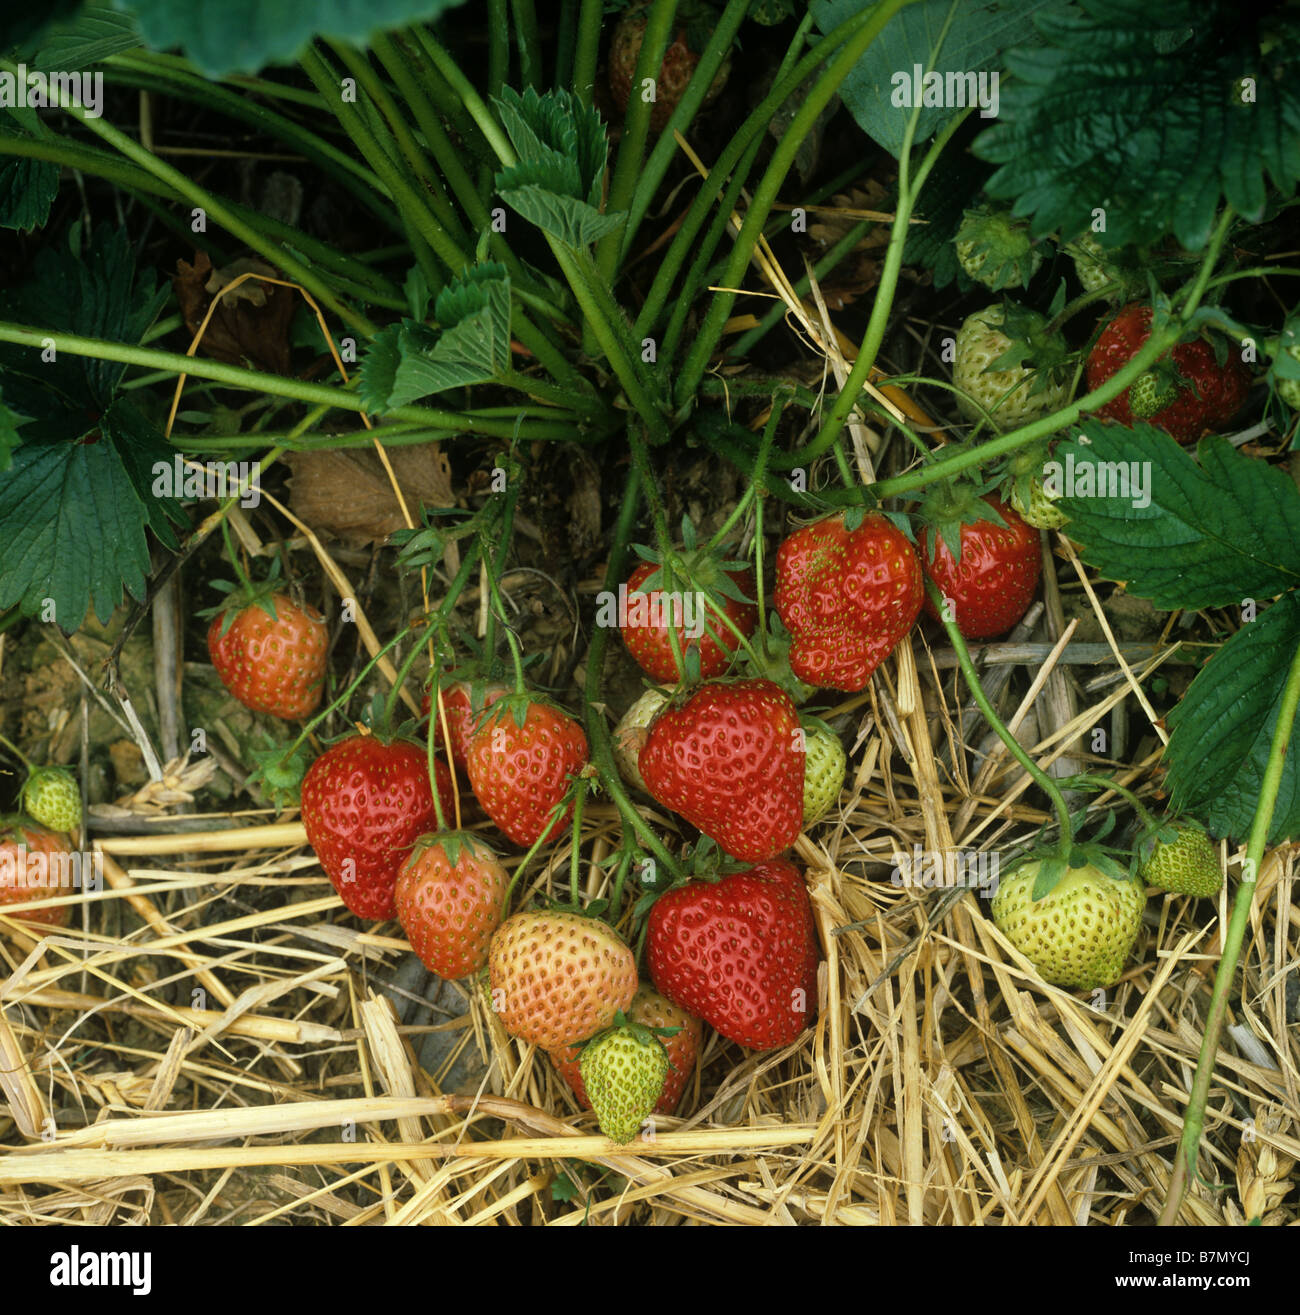 English strawberry crop in fruit with straw mulch between the rows Stock Photo